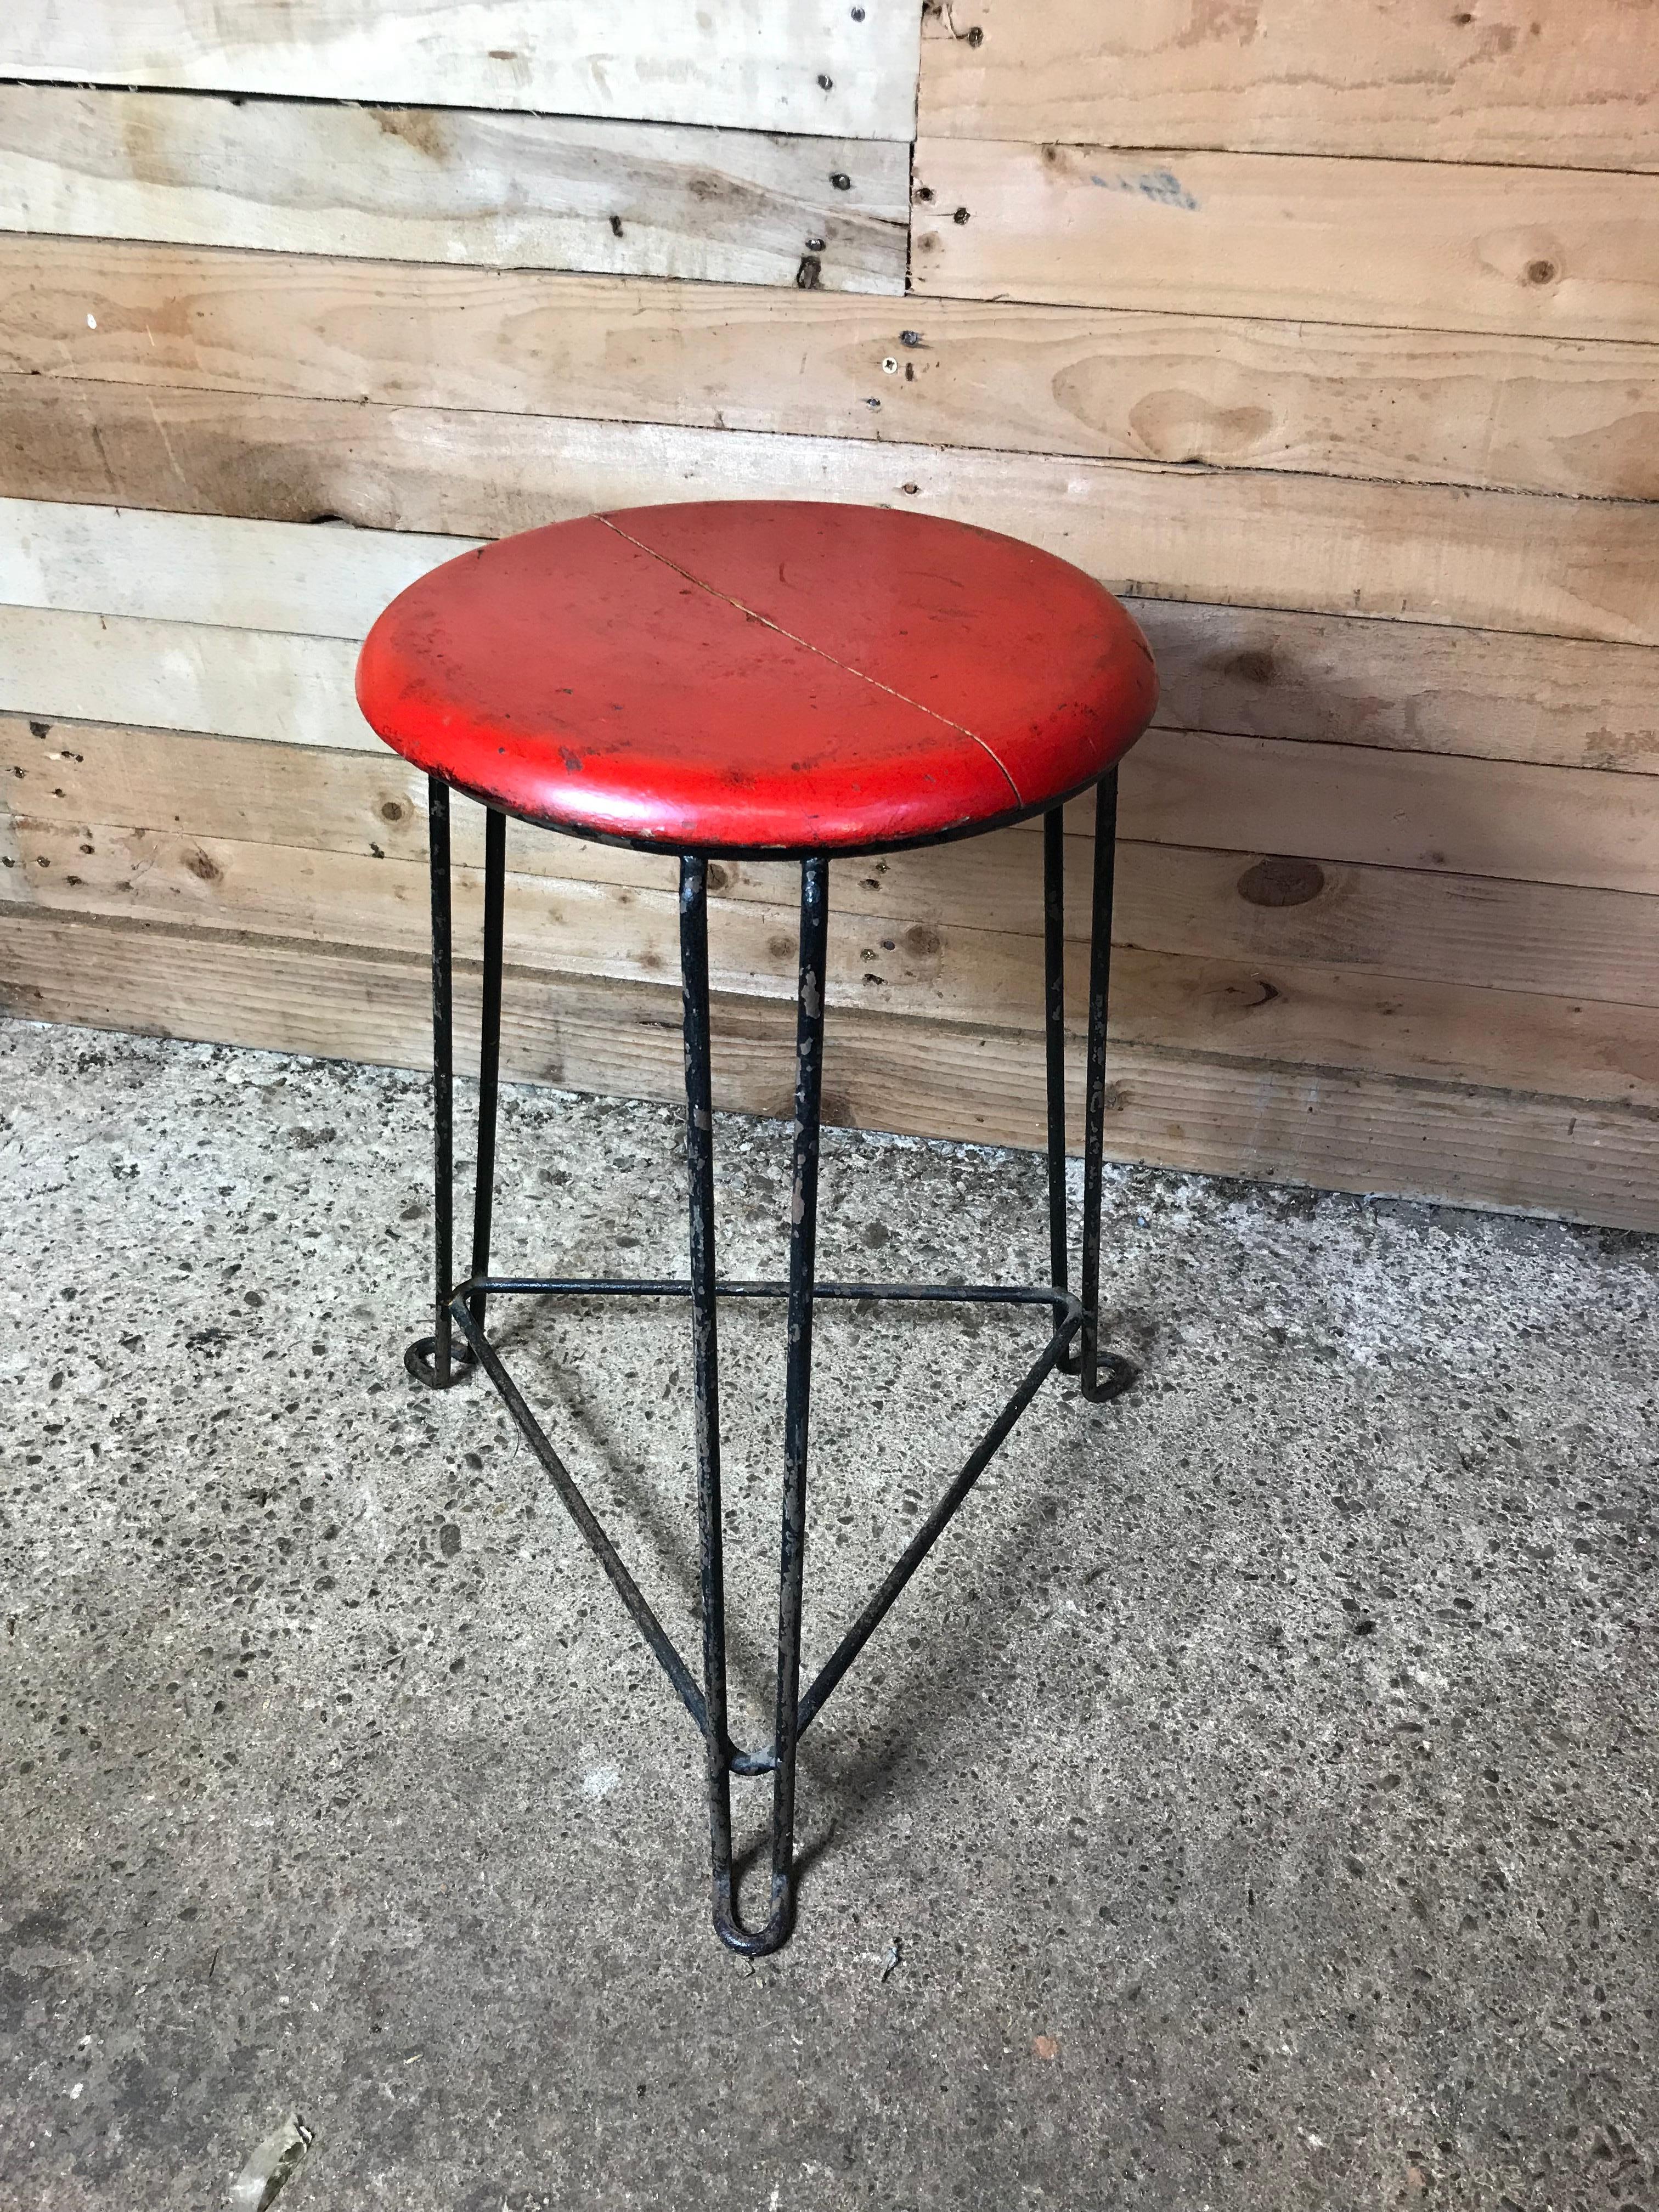 Mid-Century Modern Retro 1960s Wooden Seat with Metal Frame Tomado Stool 'Red Seat' For Sale